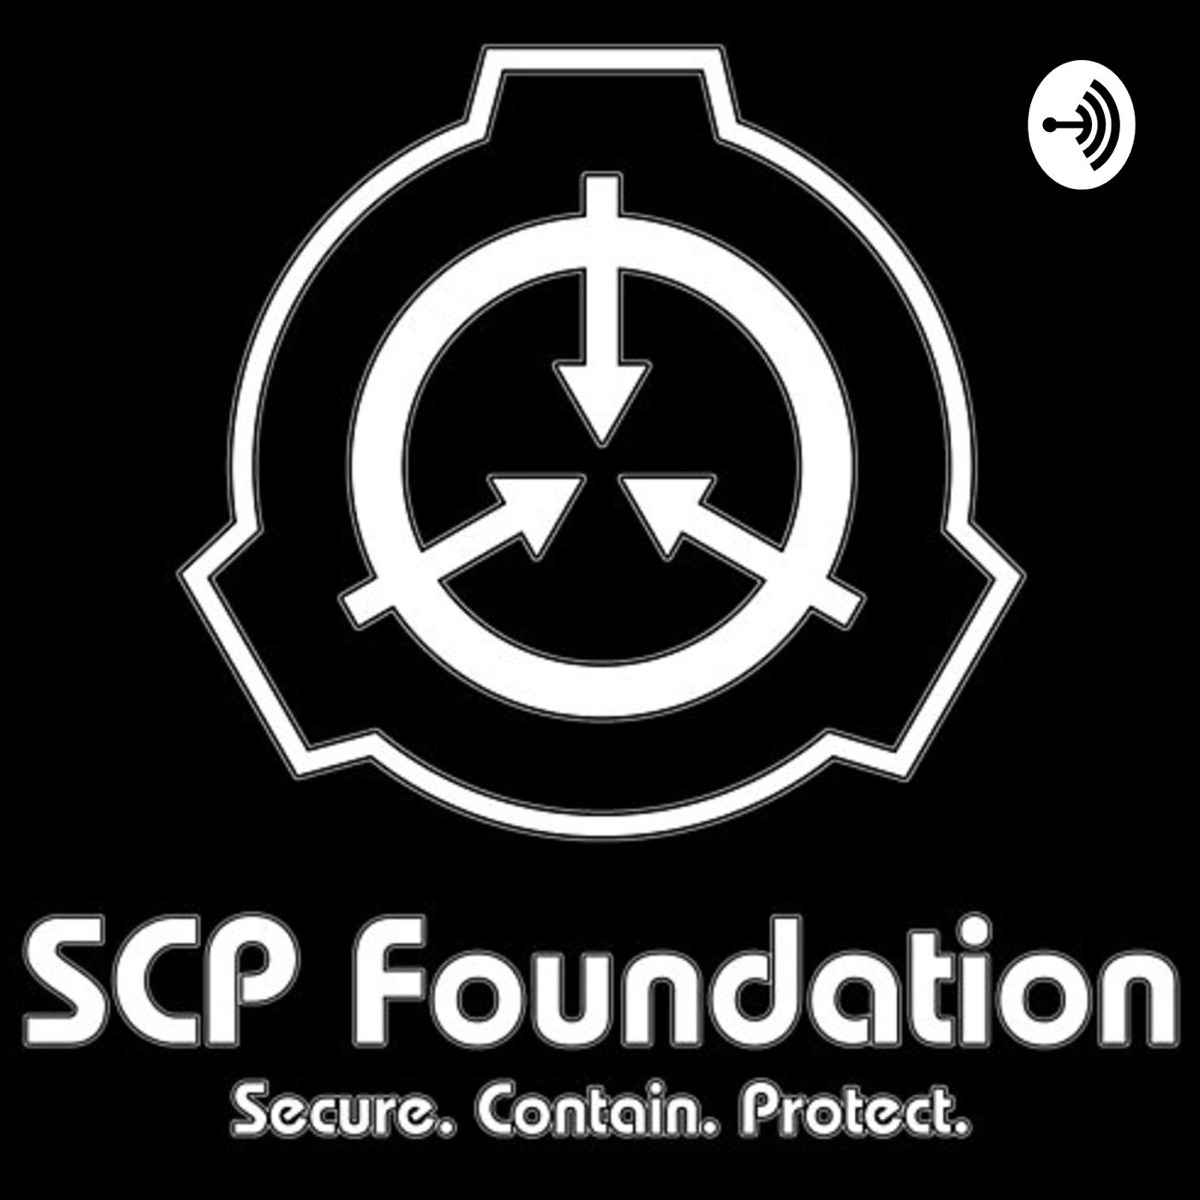 Scp-3000 Anantashesha Object Class-Thaumiel – SCP_Revealed – Podcast –  Podtail